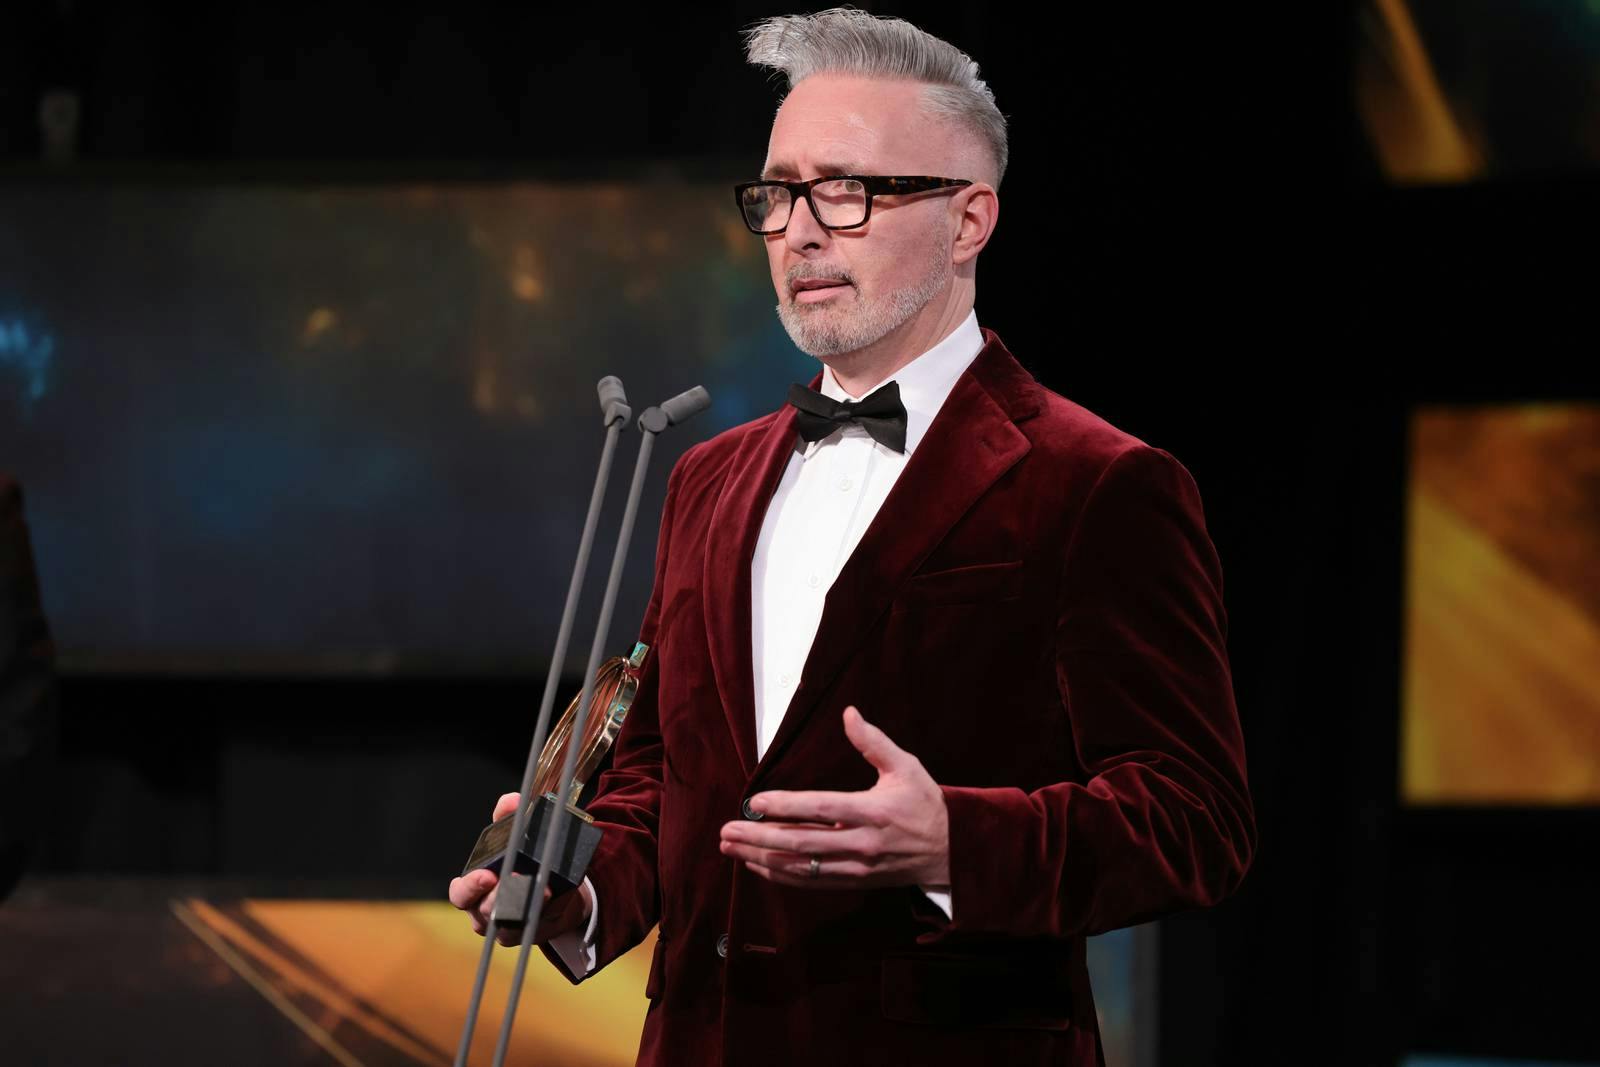 Martin McKay wearing a read velvet suit on stage at the EY Entrepreneur of the Year awards in Powerscourt, giving his acceptance speech 